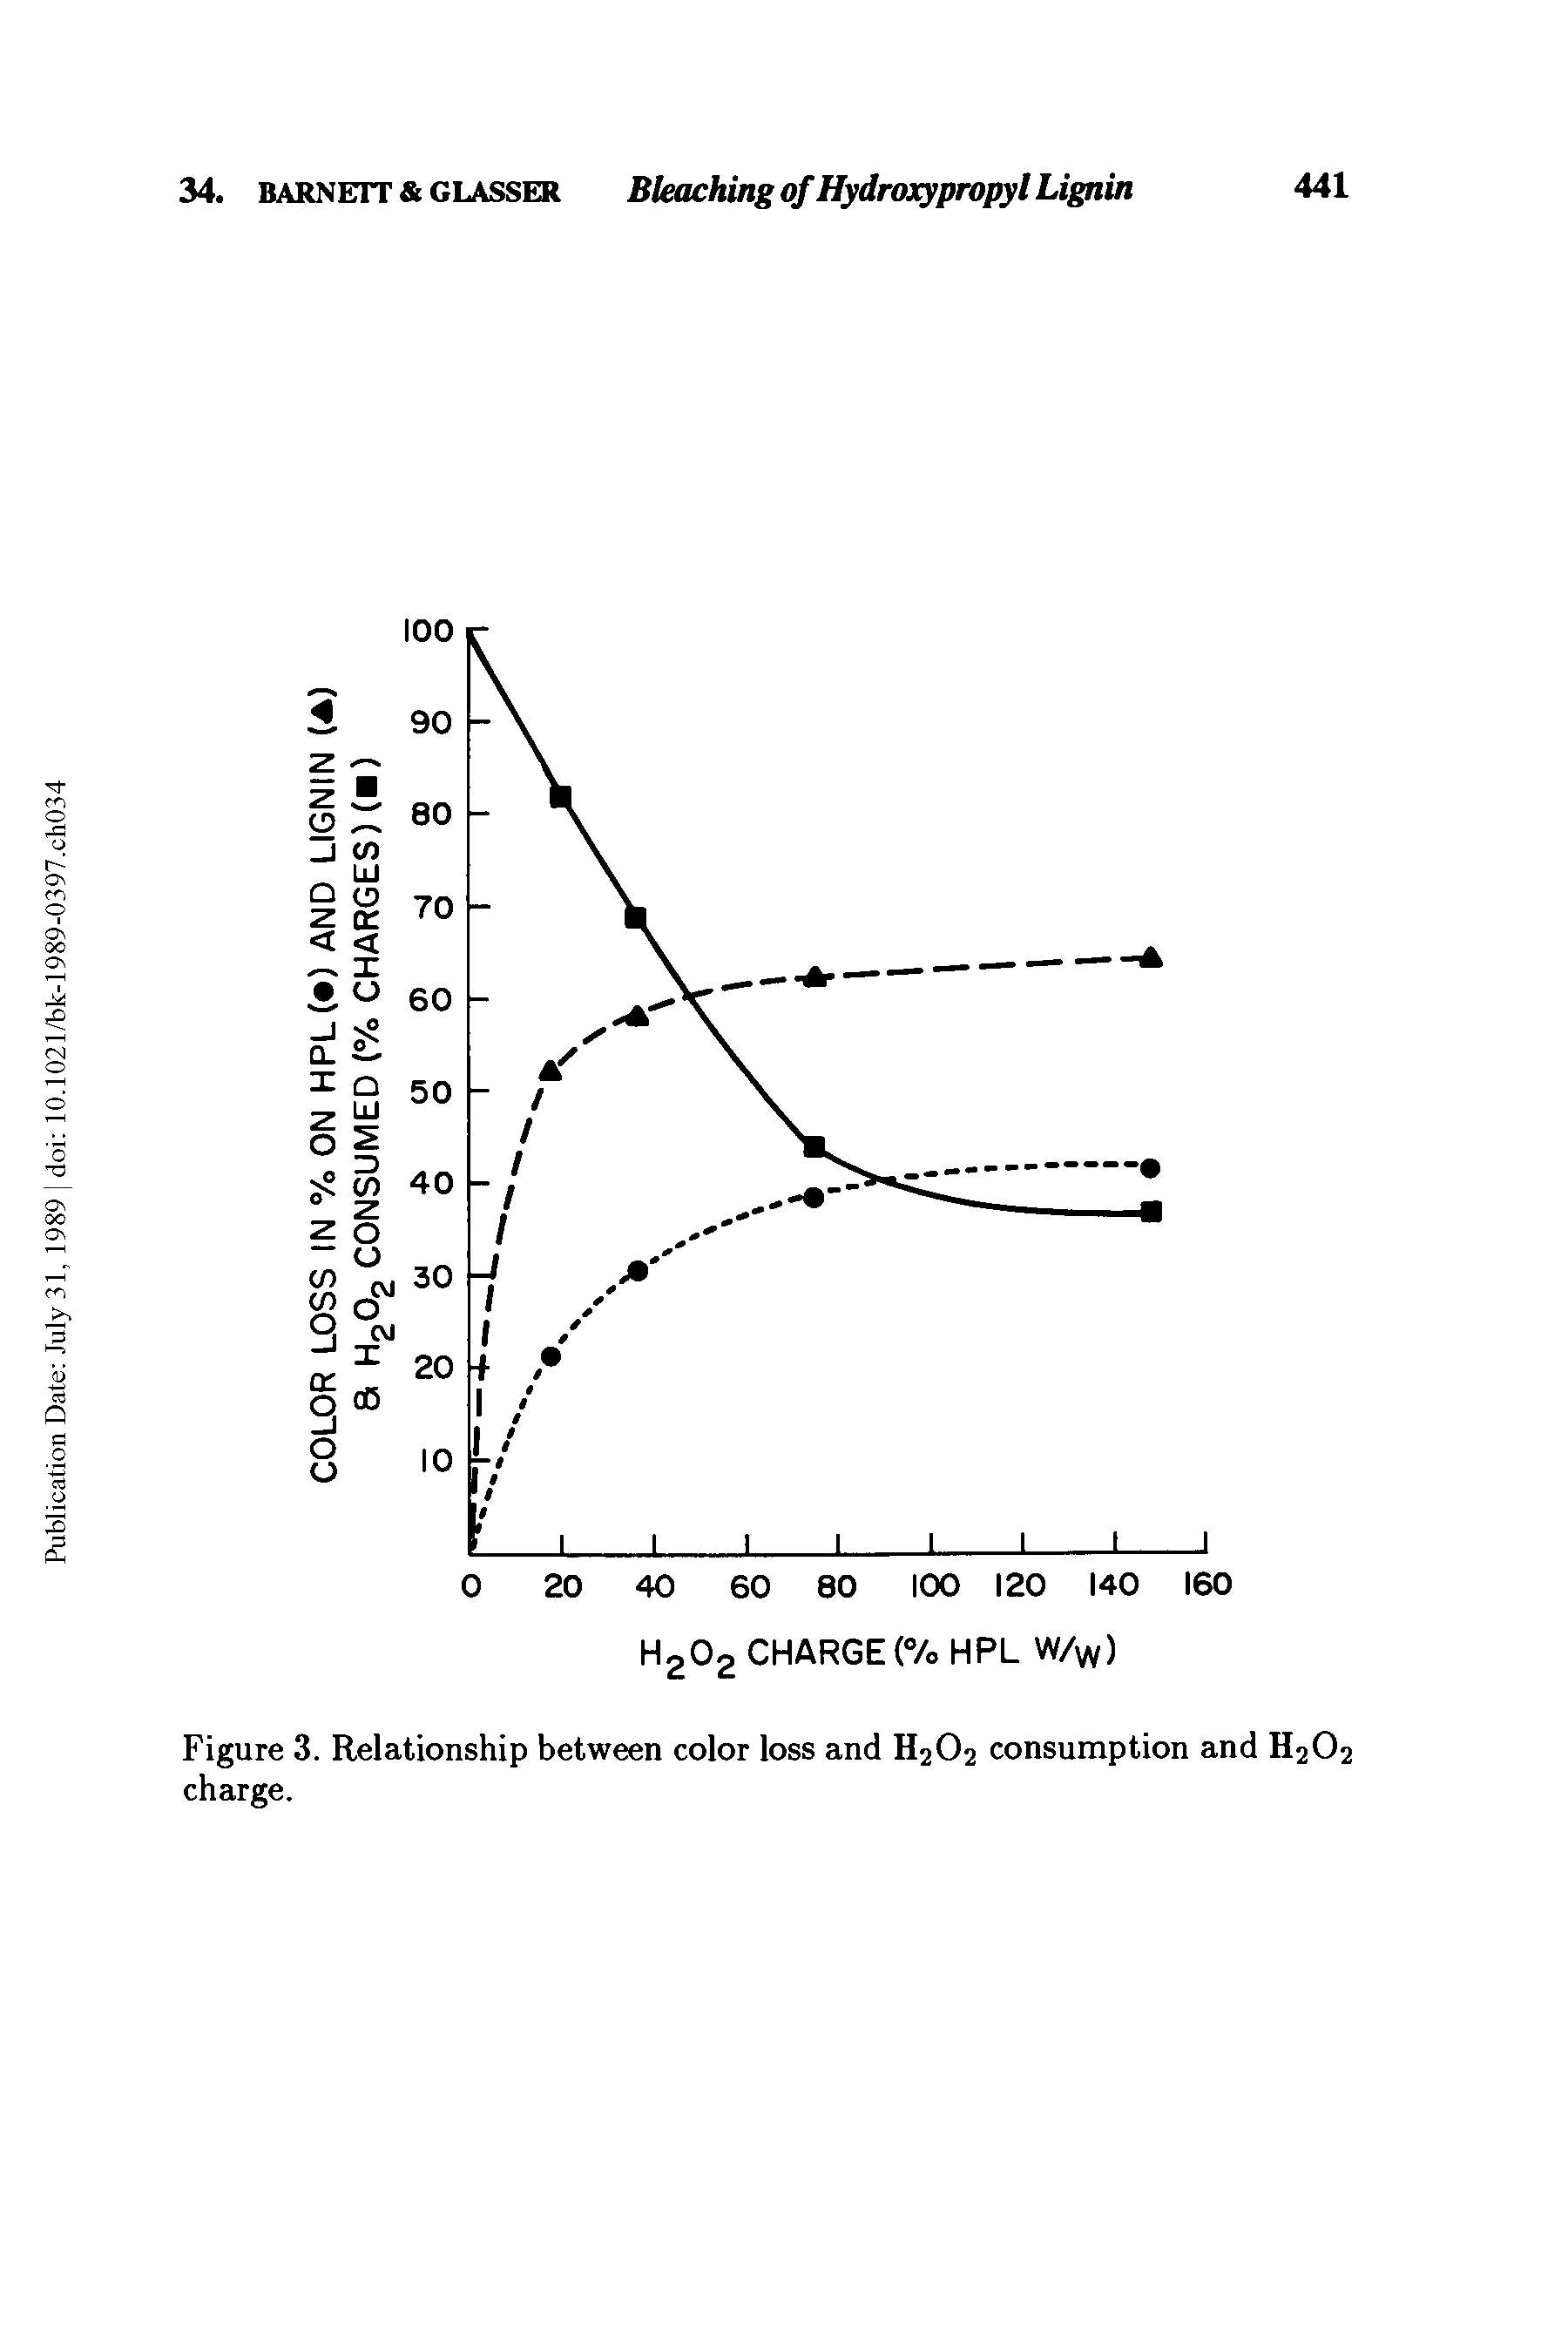 Figure 3. Relationship between color loss and H2O2 consumption and H2O2 charge.